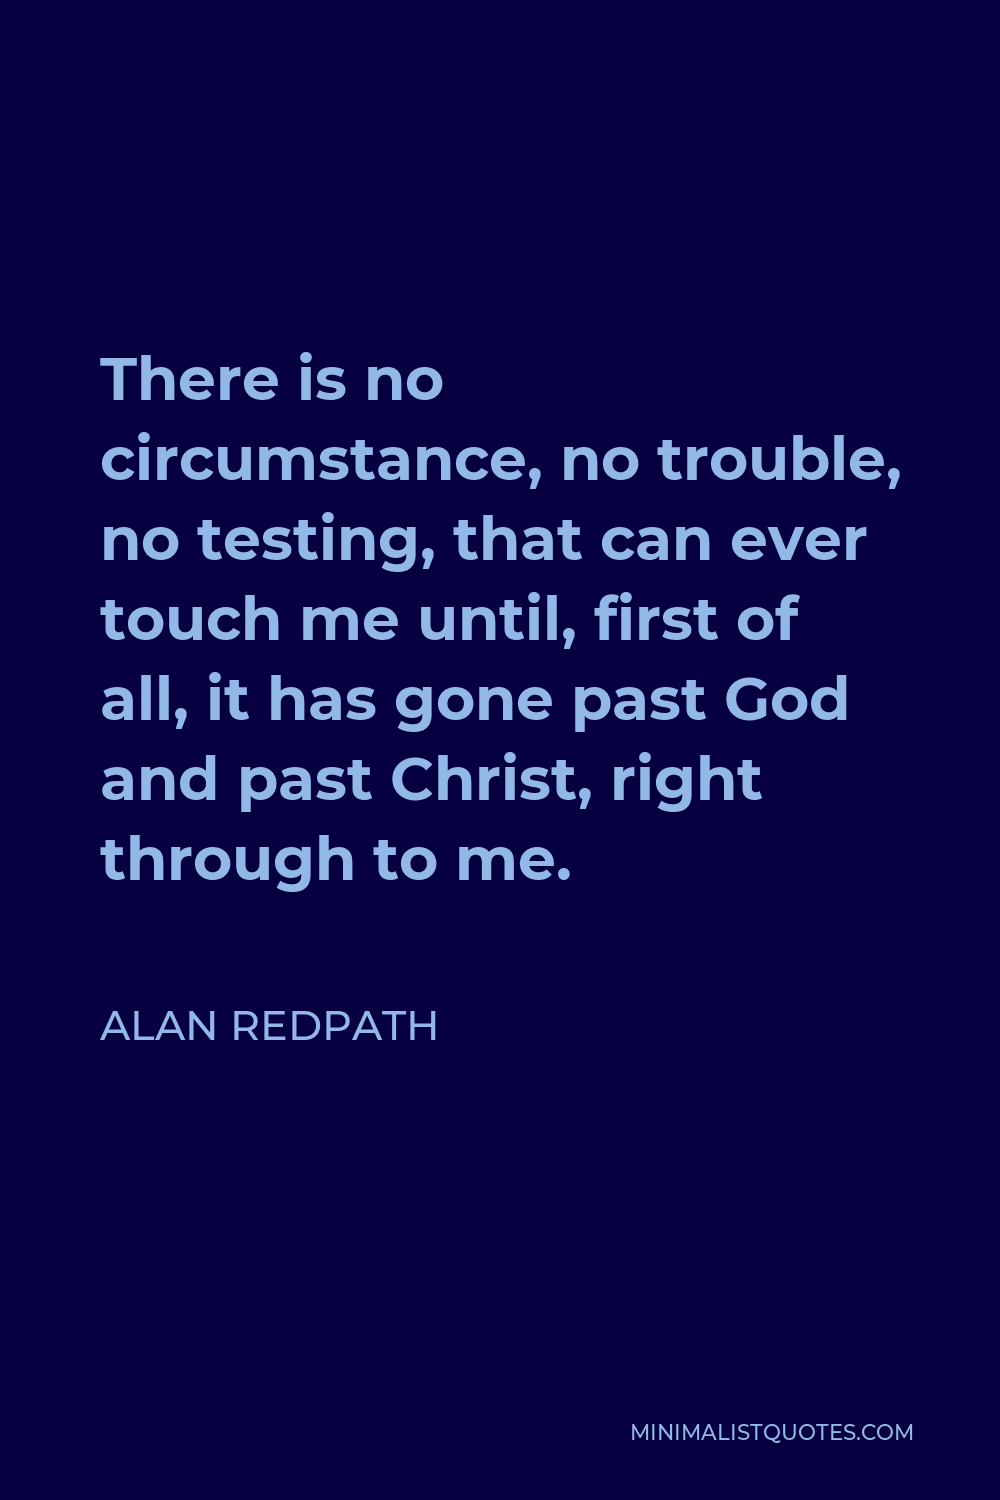 Alan Redpath Quote - There is no circumstance, no trouble, no testing, that can ever touch me until, first of all, it has gone past God and past Christ, right through to me.